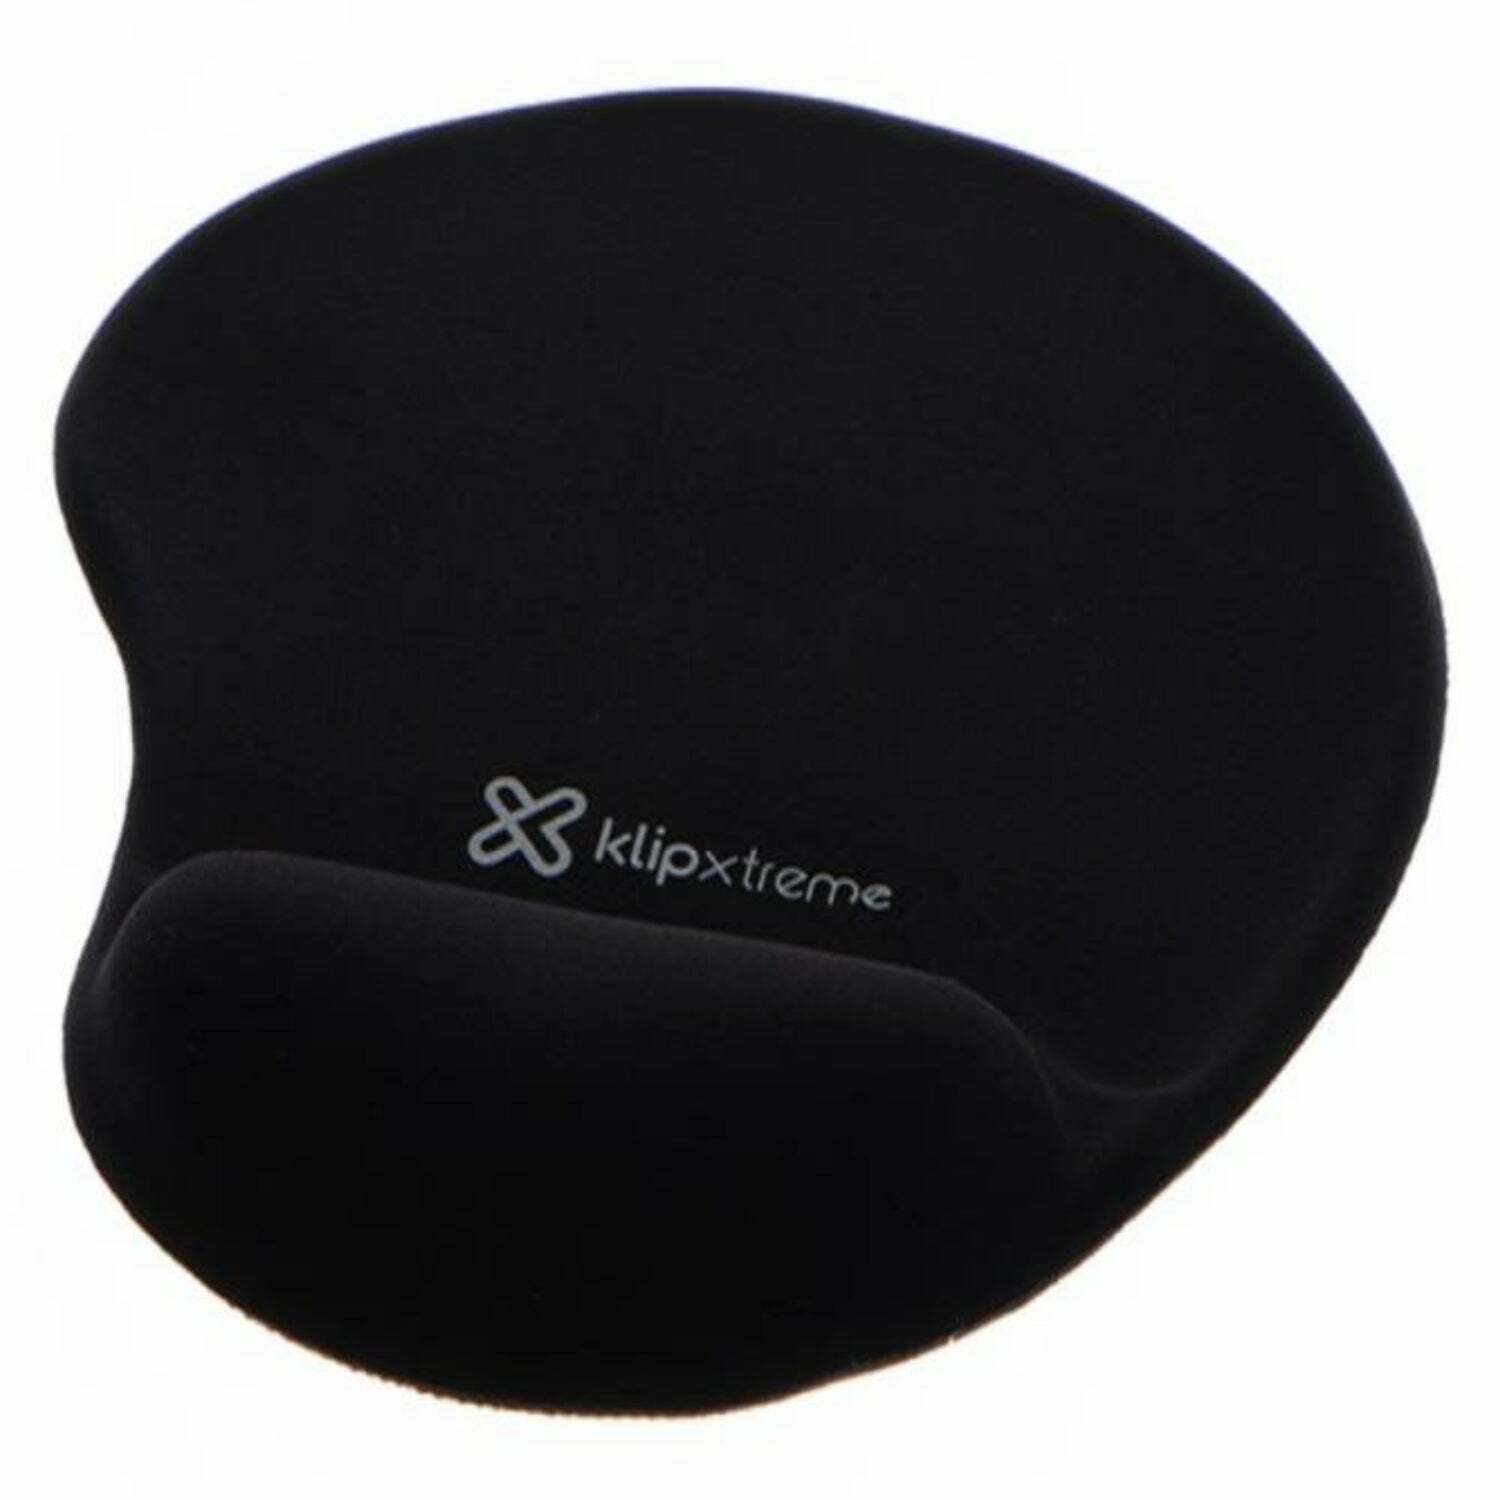 Klip Xtreme - Gel Mouse Pad with Wrist Support, Non-slip Rubberized Base - Black